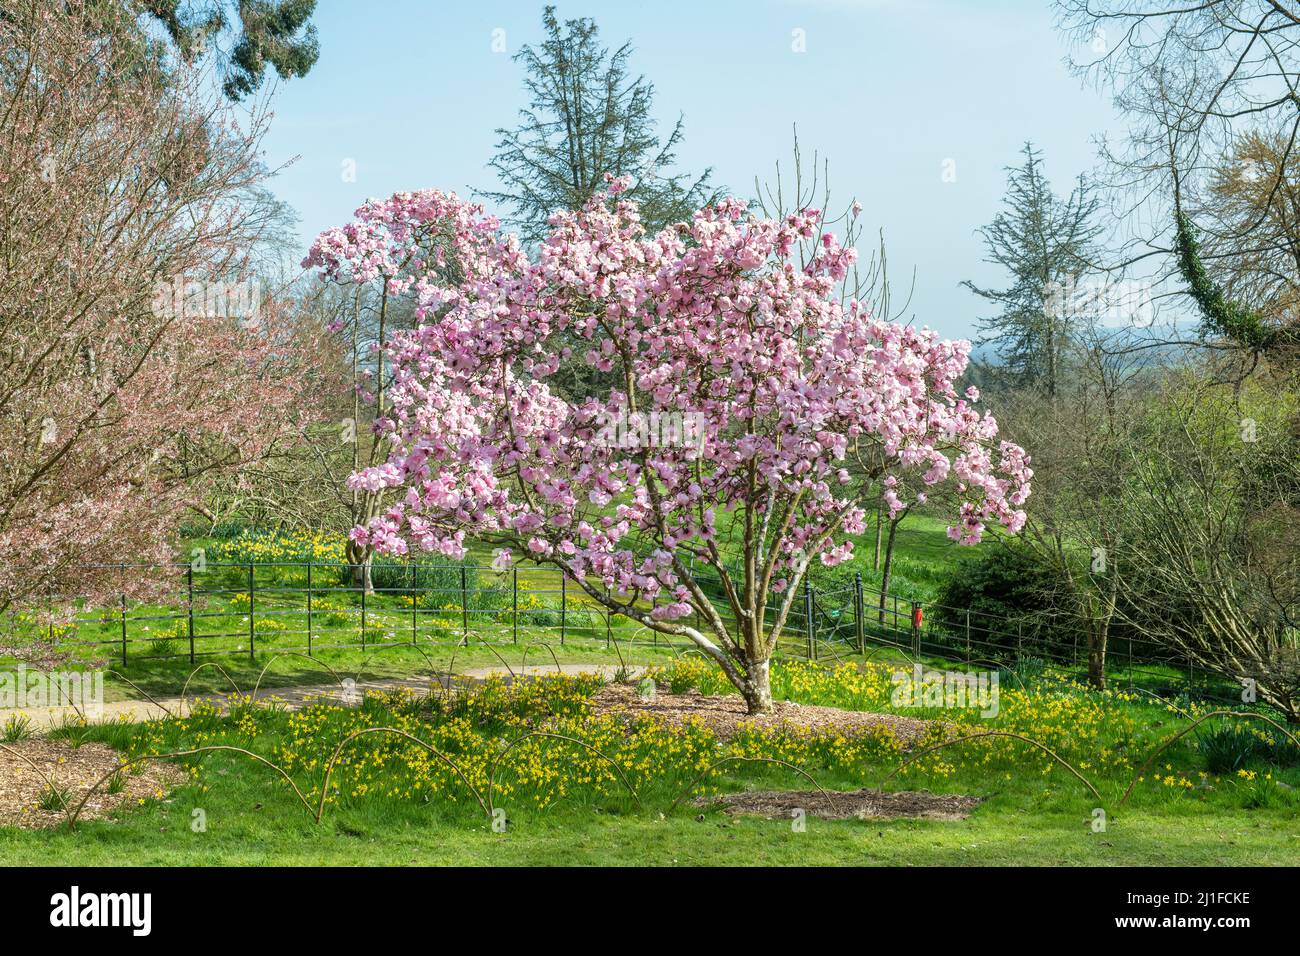 Magnolia Caerhays Belle tree flowering in spring at Batsford arboretum,  Cotswolds, Gloucestershire, England Stock Photo